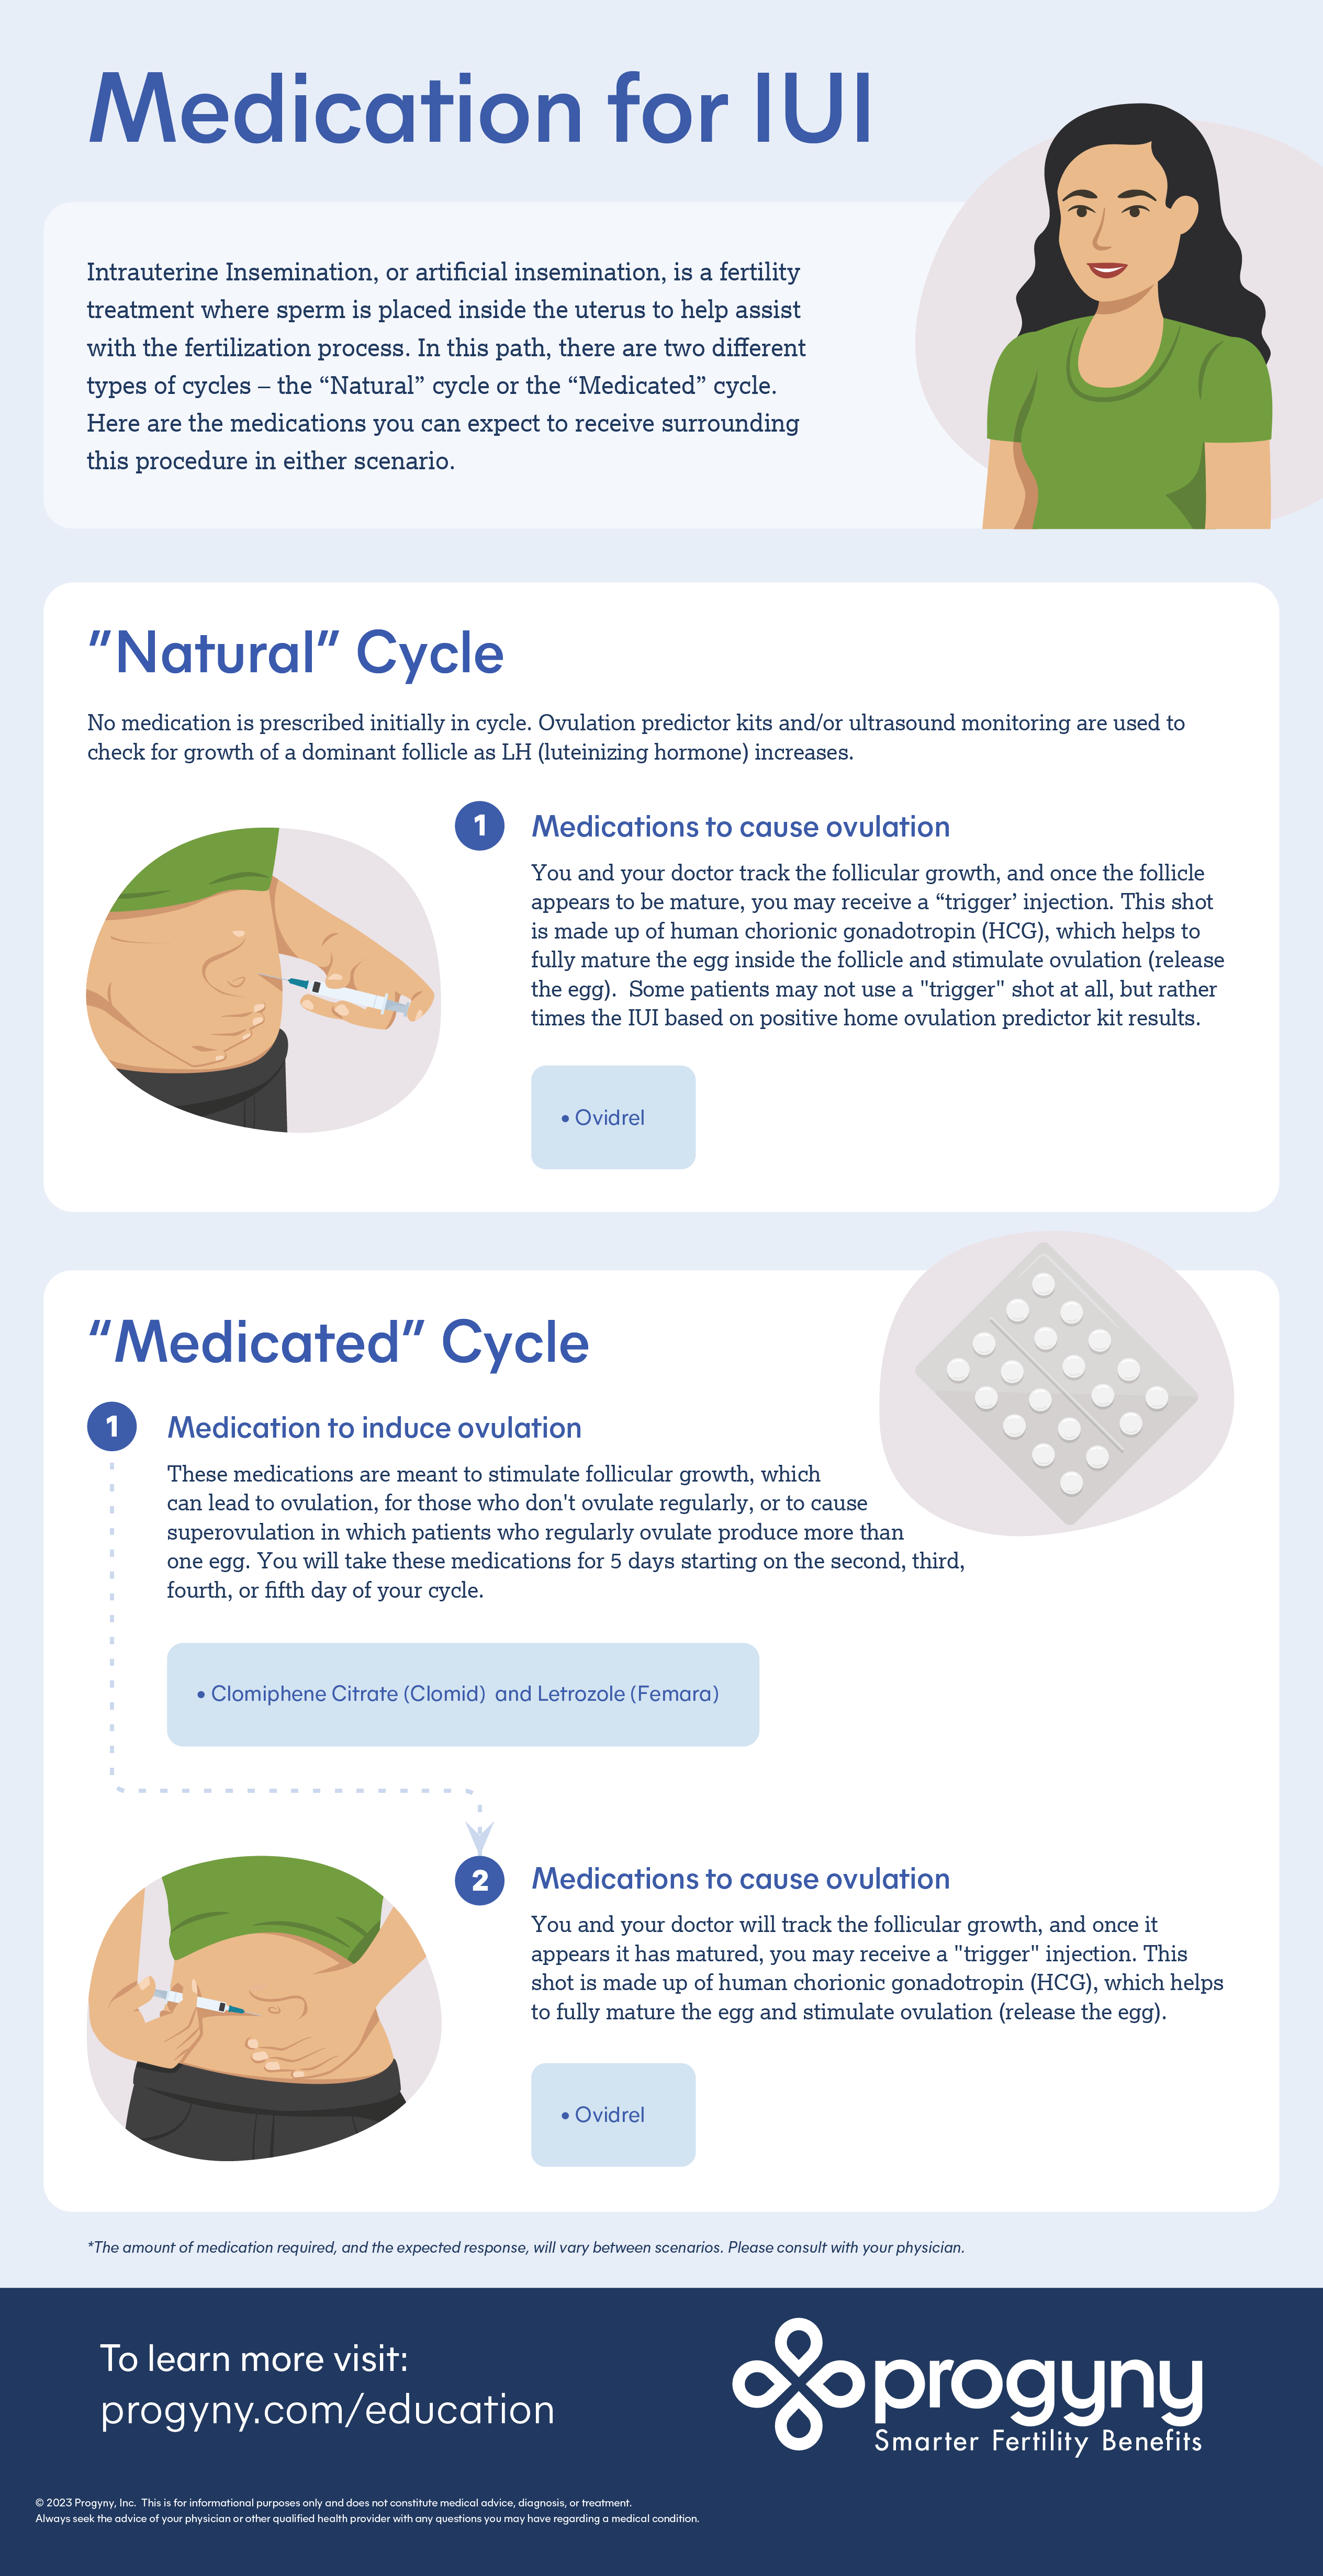 Illustrated infographic explaining Intrauterine Insemination, or artificial insemination, and its two paths "natural" cycle or "medicated" cycle